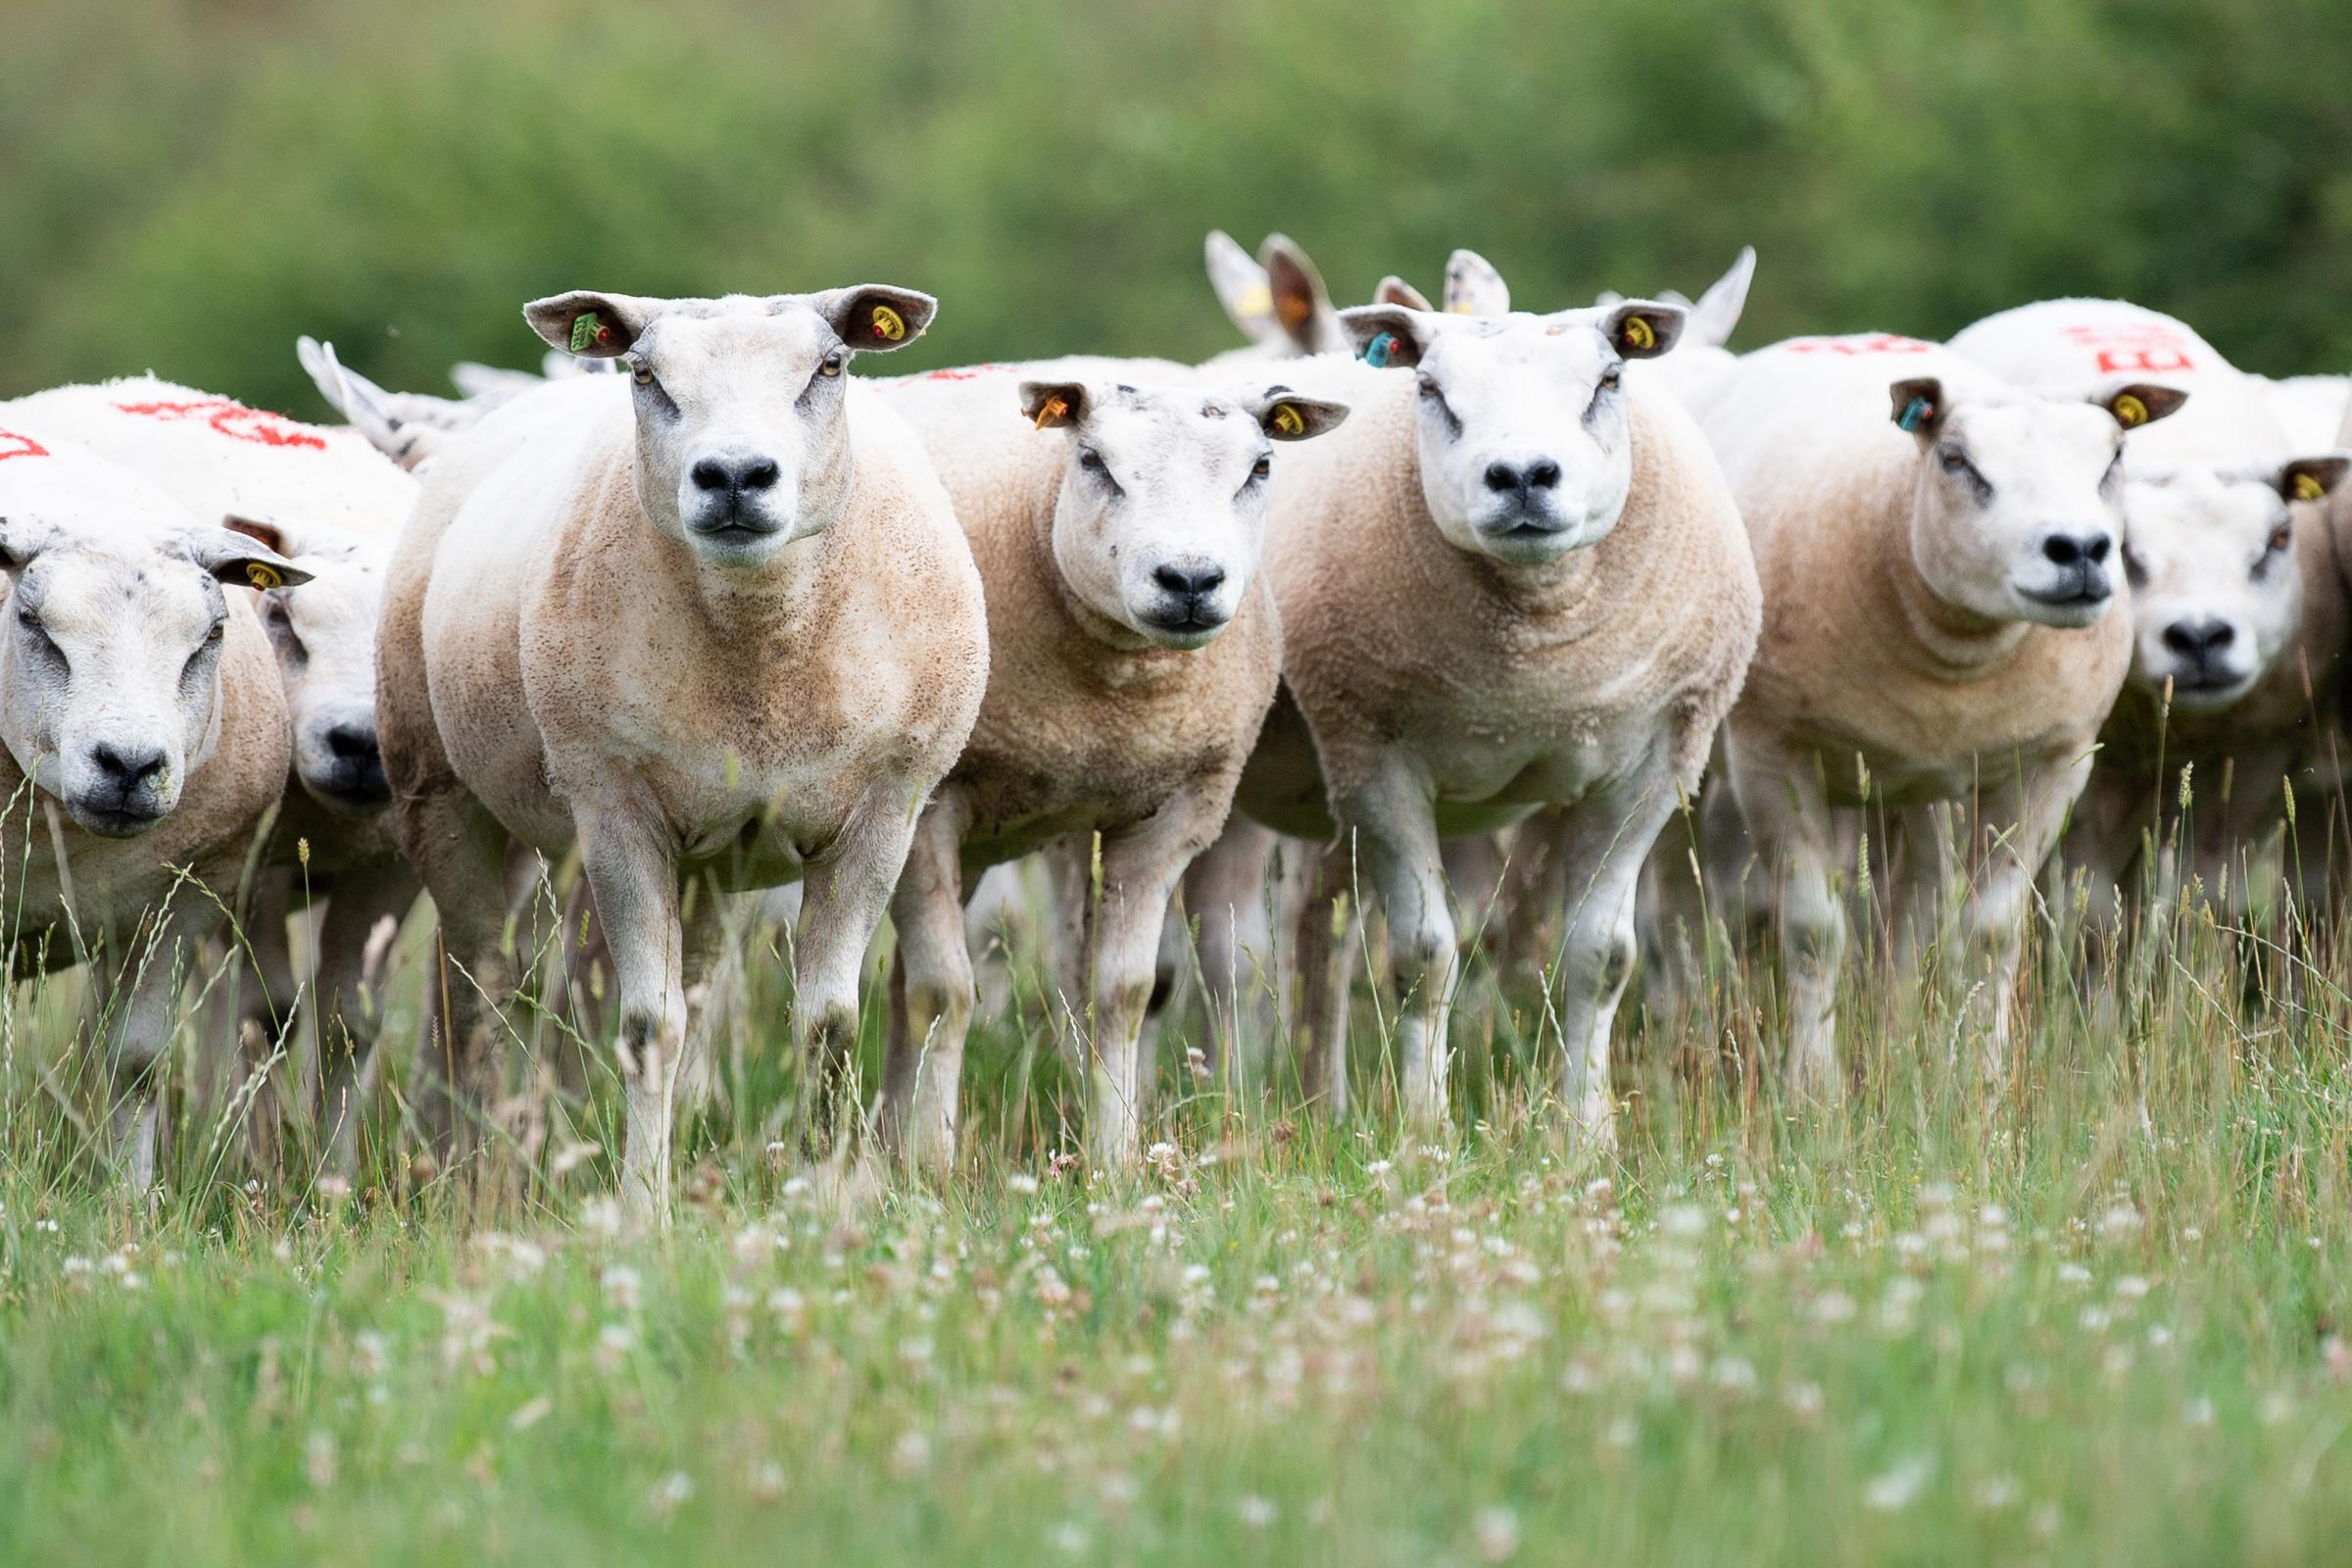 the sheep flock is an efficient way to utilise grass and fits very well with the overall farming enterprise at Faughhill Ref:RH290721097 Rob Haining / The Scottish Farmer...